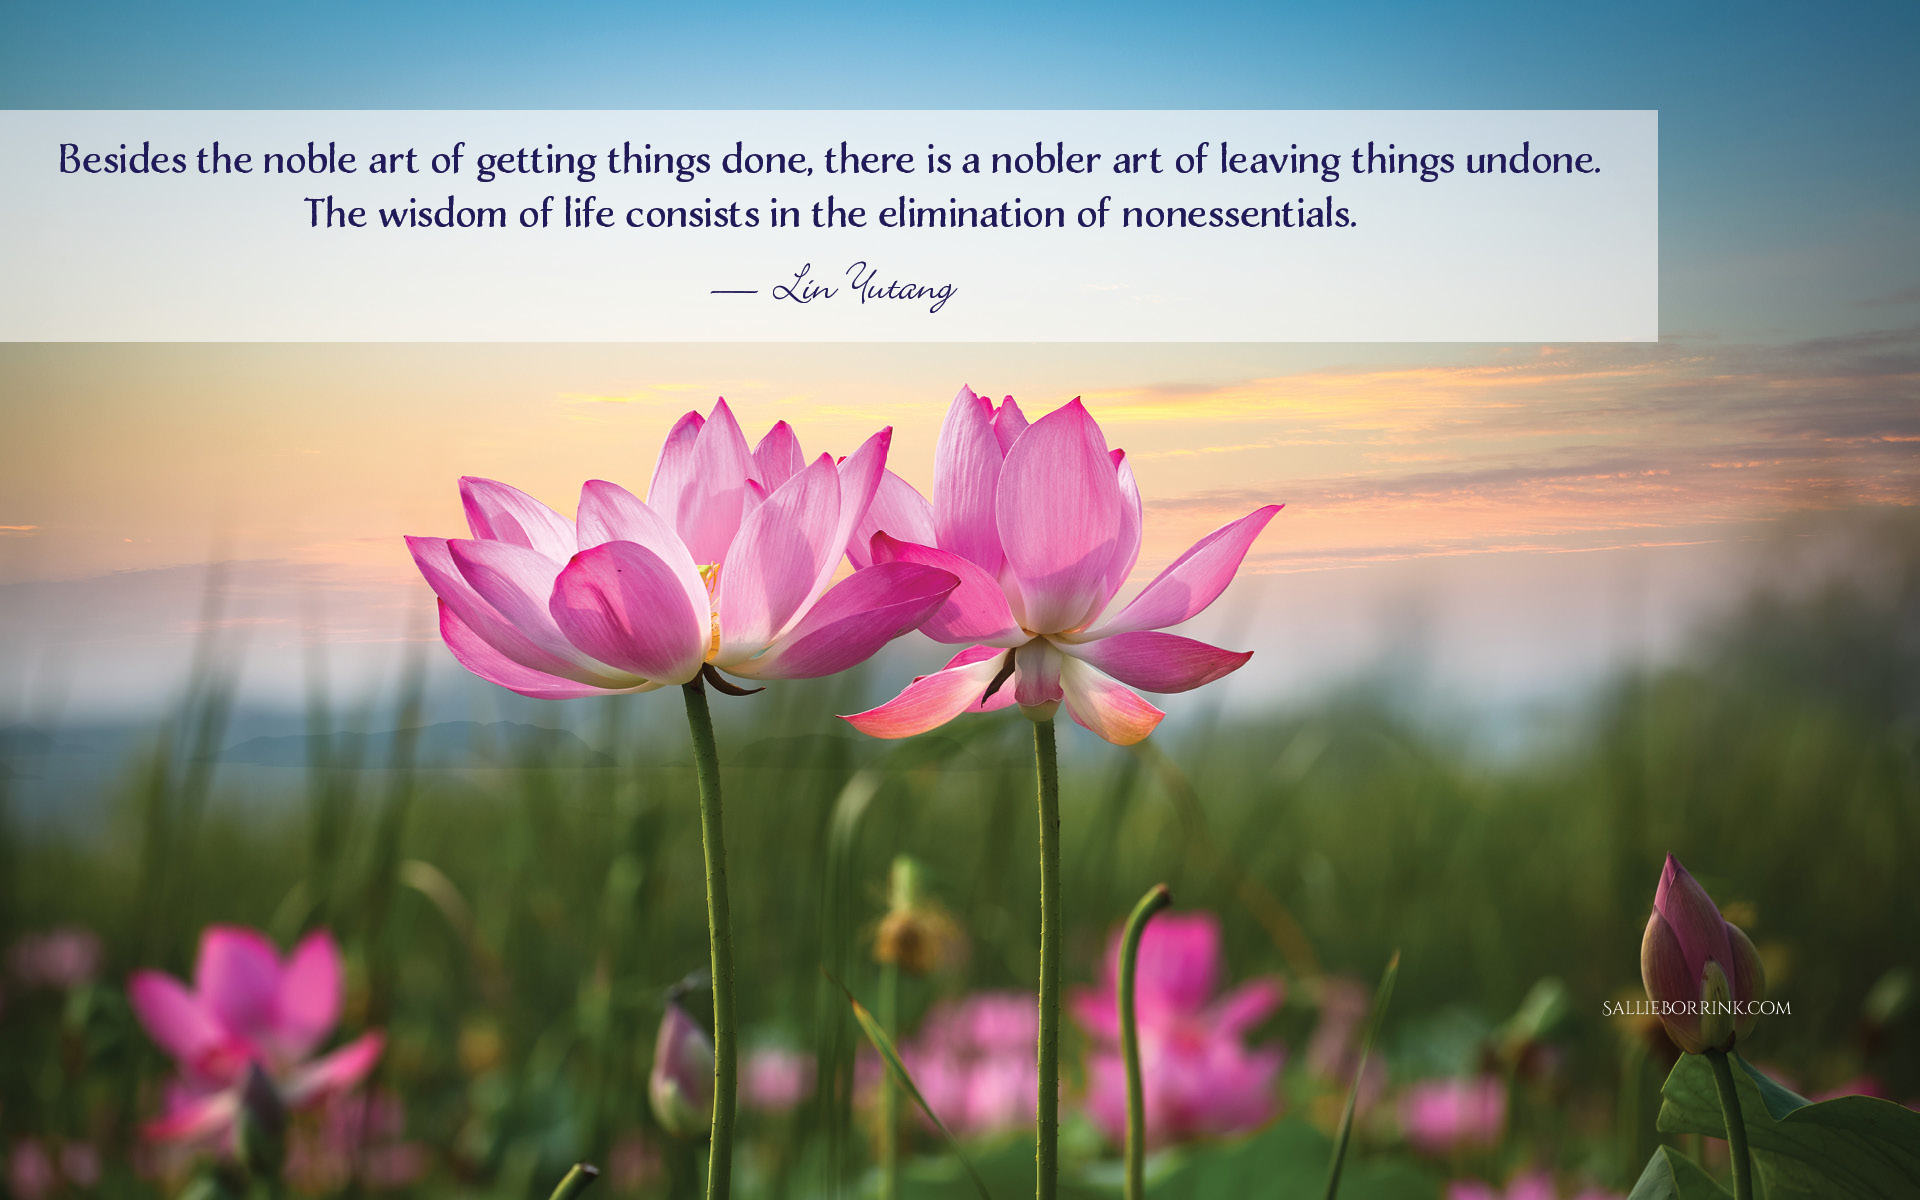 Besides the noble art of getting things done, there is a nobler art of leaving things undone. The wisdom of life consists in the elimination of nonessentials. — Lin Yutang